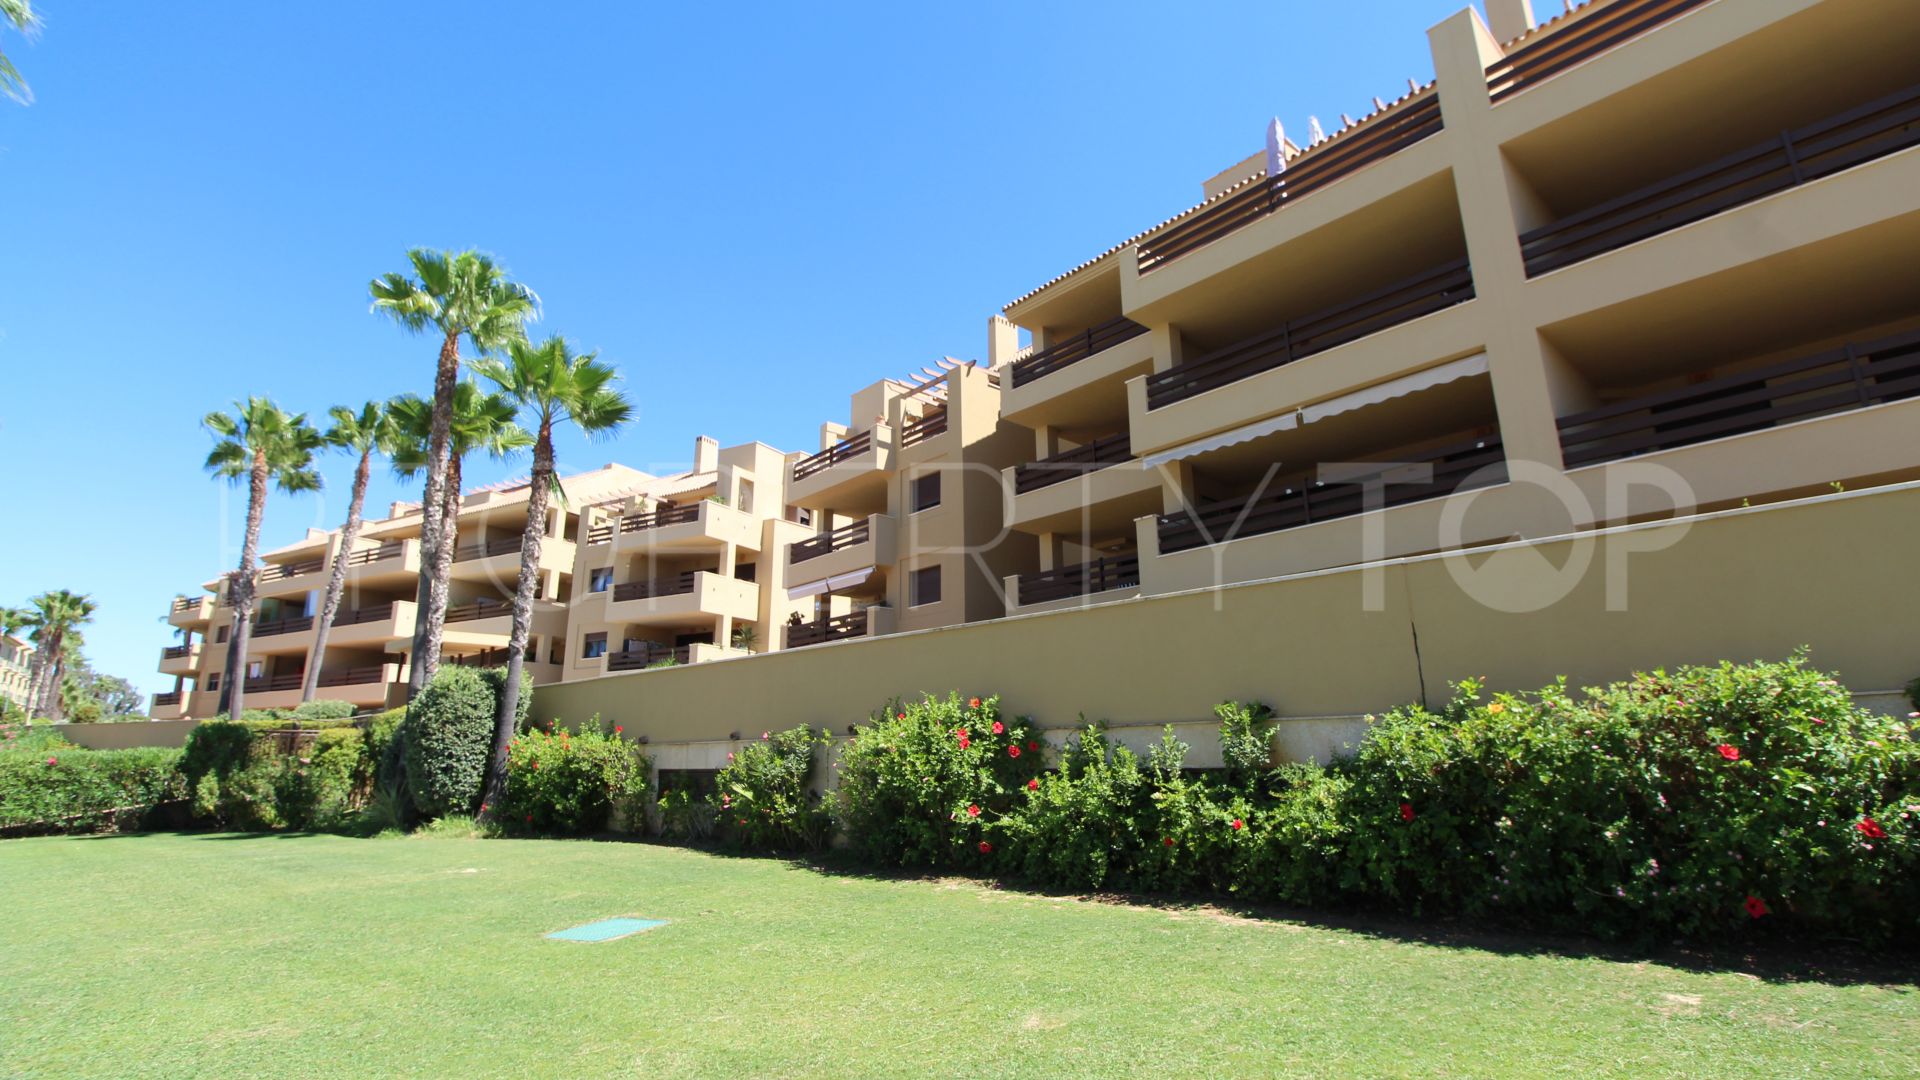 For sale ground floor apartment in Ribera del Paraiso with 2 bedrooms